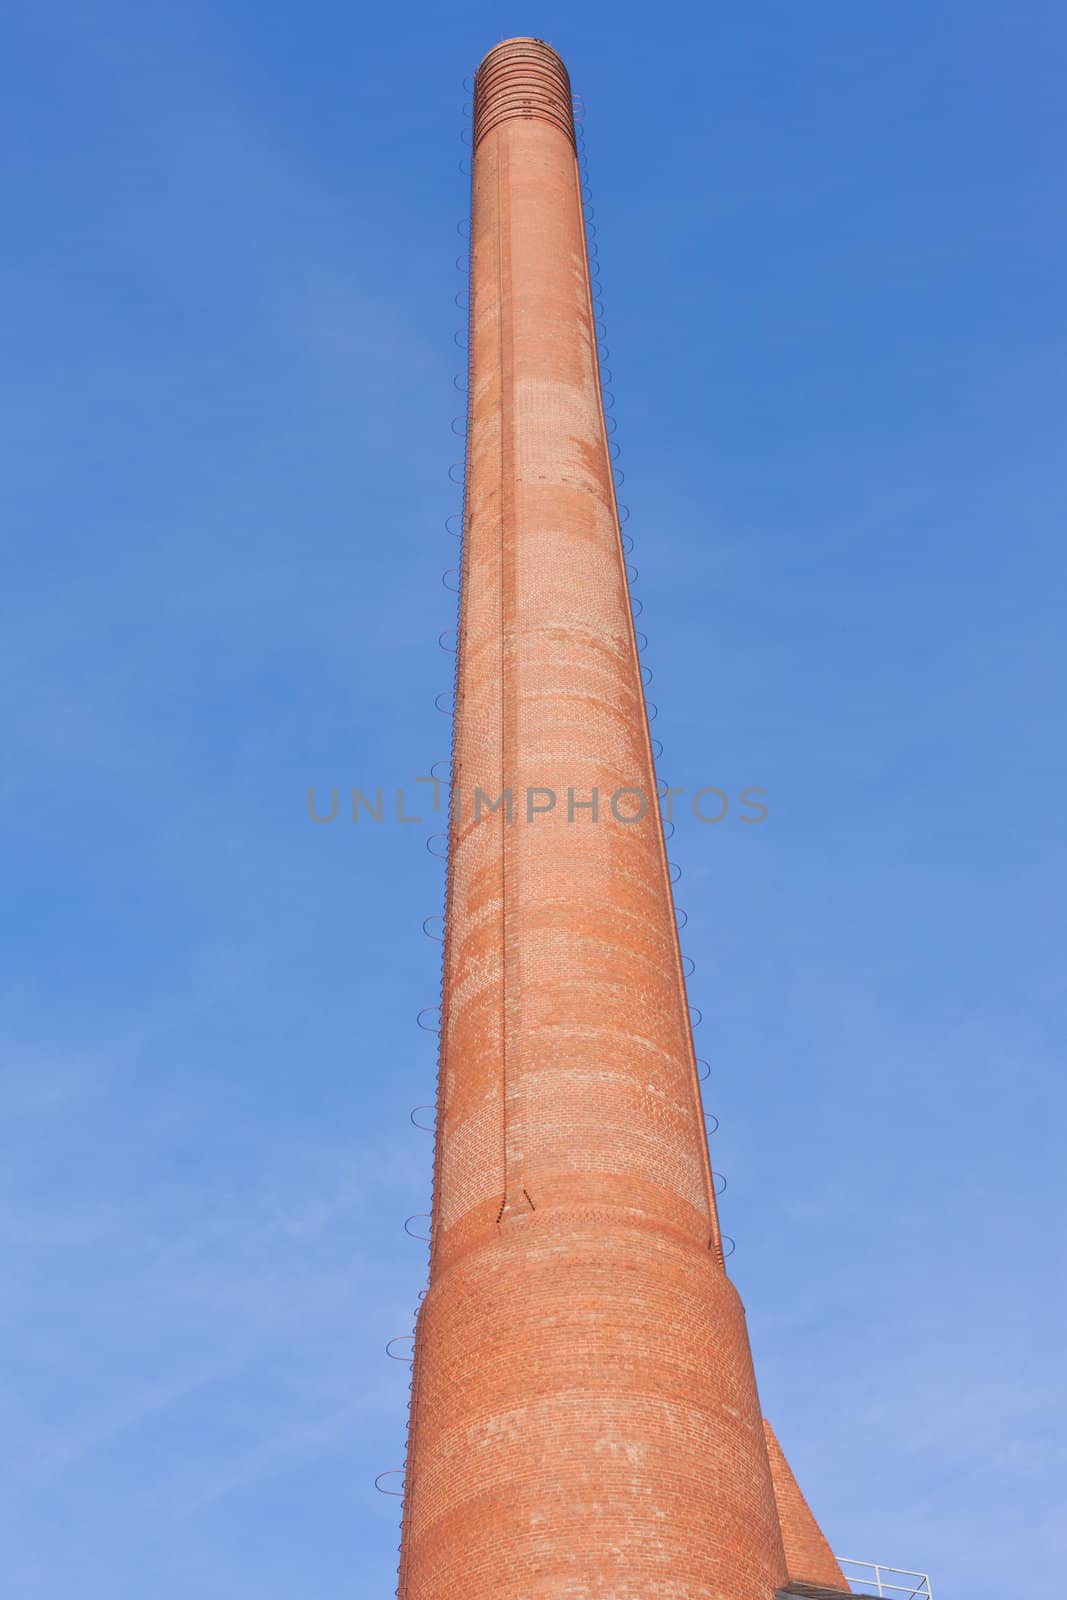 Retro designed industrial brick building with high red brick chimney.